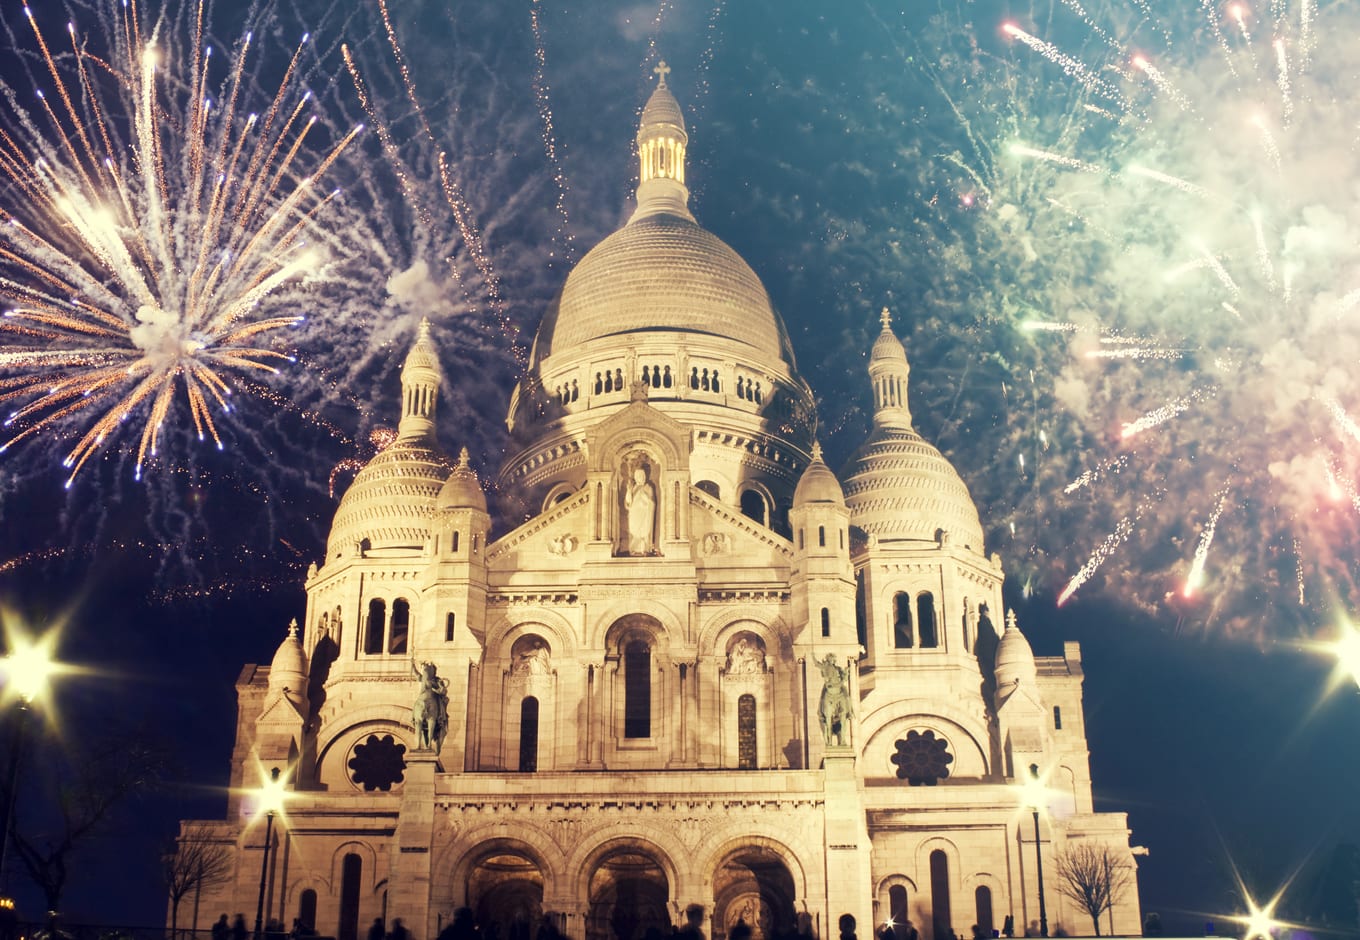 The Sacre Coeur church with fireworks, during the New Year in Paris, France
